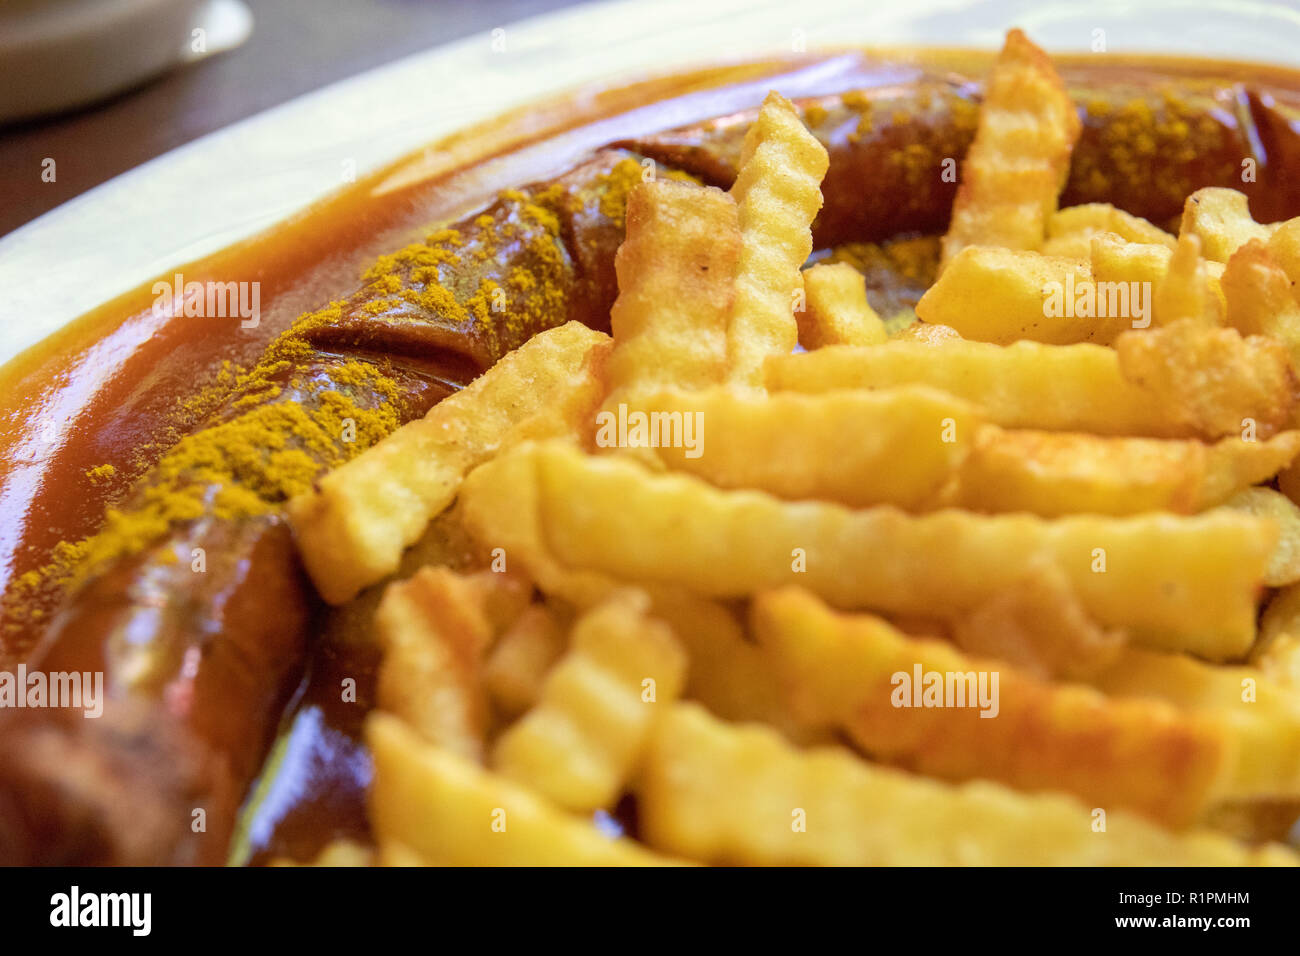 Currywurst (curry wurst, German Sausage) and French Fries close up food photography. Germany dish, German food, paprika, spicy. Stock Photo